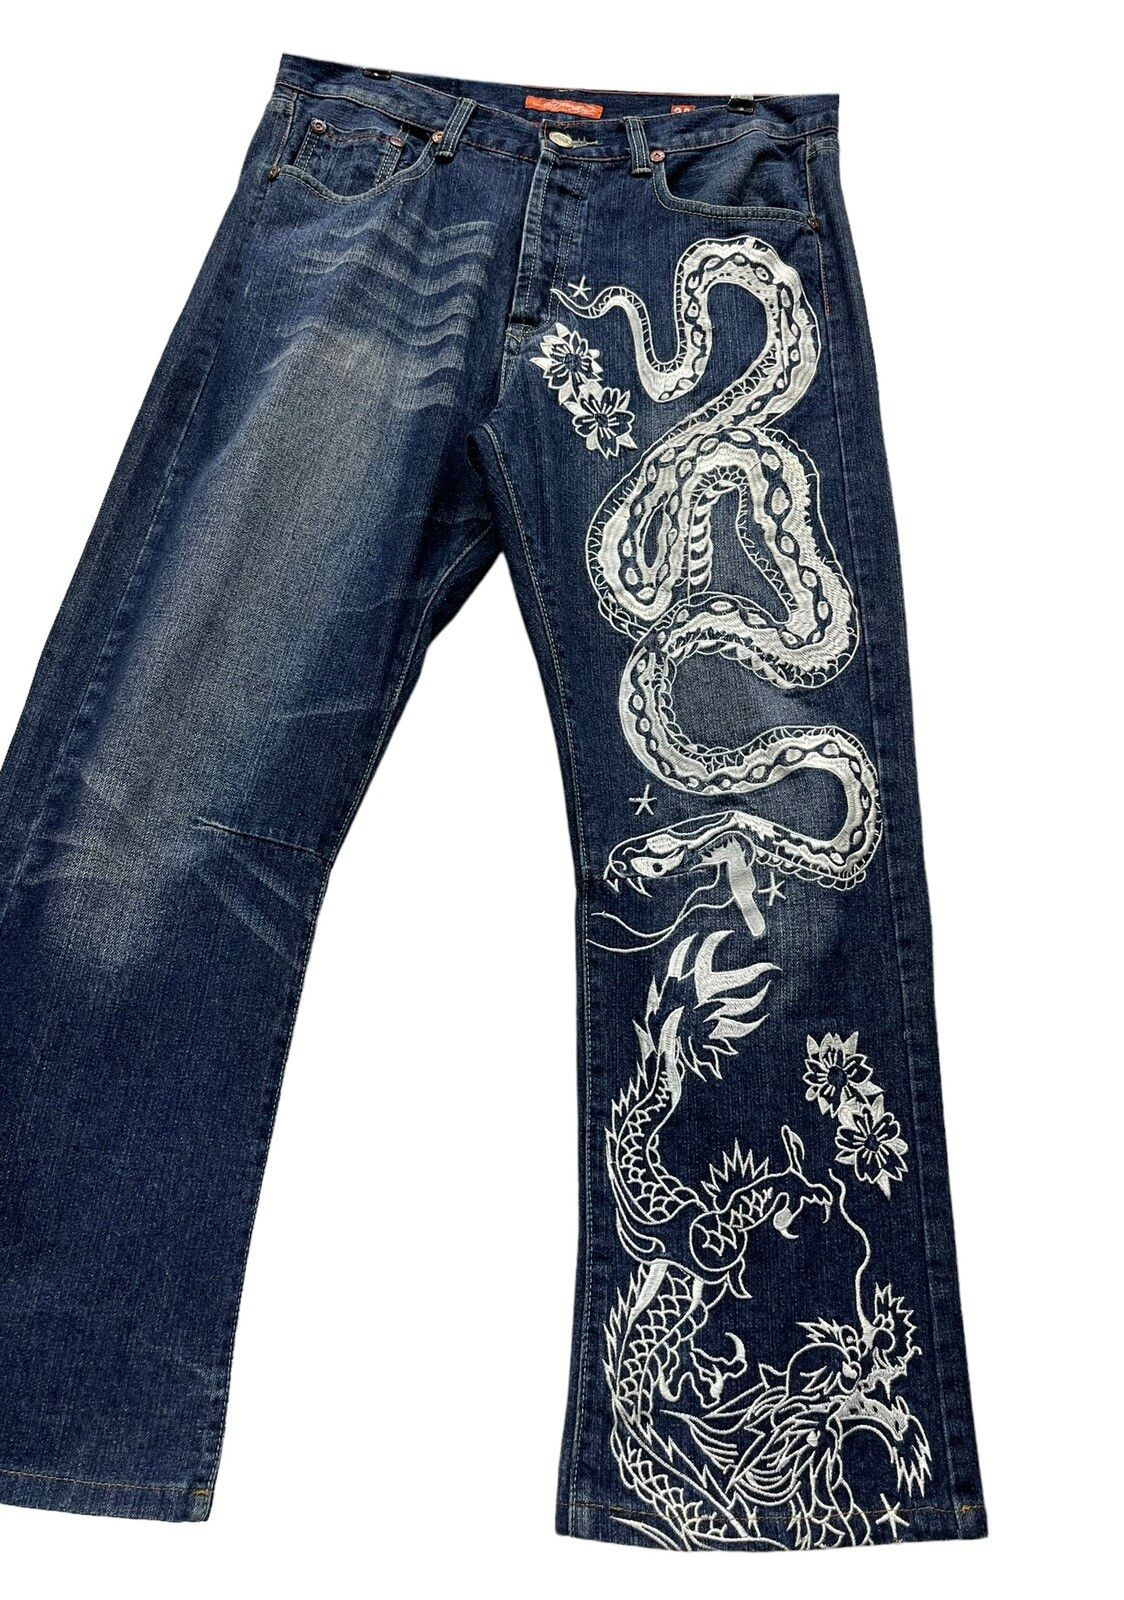 Ed Hardy BINDING NOW🔥ED HARDY Snake & Dragon Embroidered Tattoo Wear Size US 33 - 1 Preview